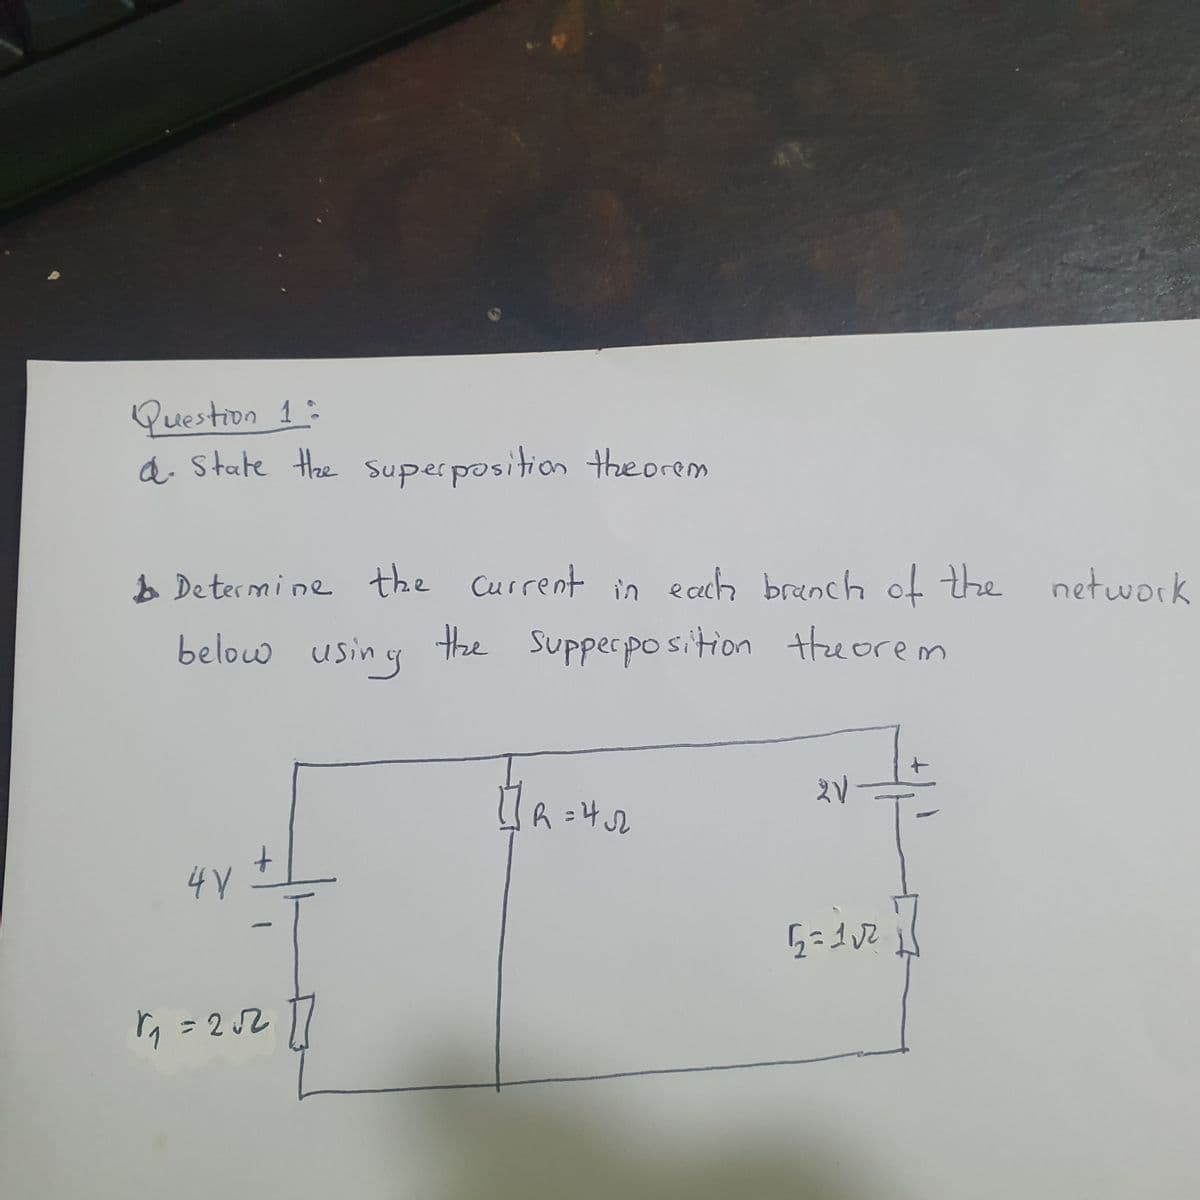 Question 1:
d. State the superposition theorem
1 Determine the current in each branch of the network
below using the supperposition theorem
4V
1₁=205211
R = 4√22
2V
52=112
+